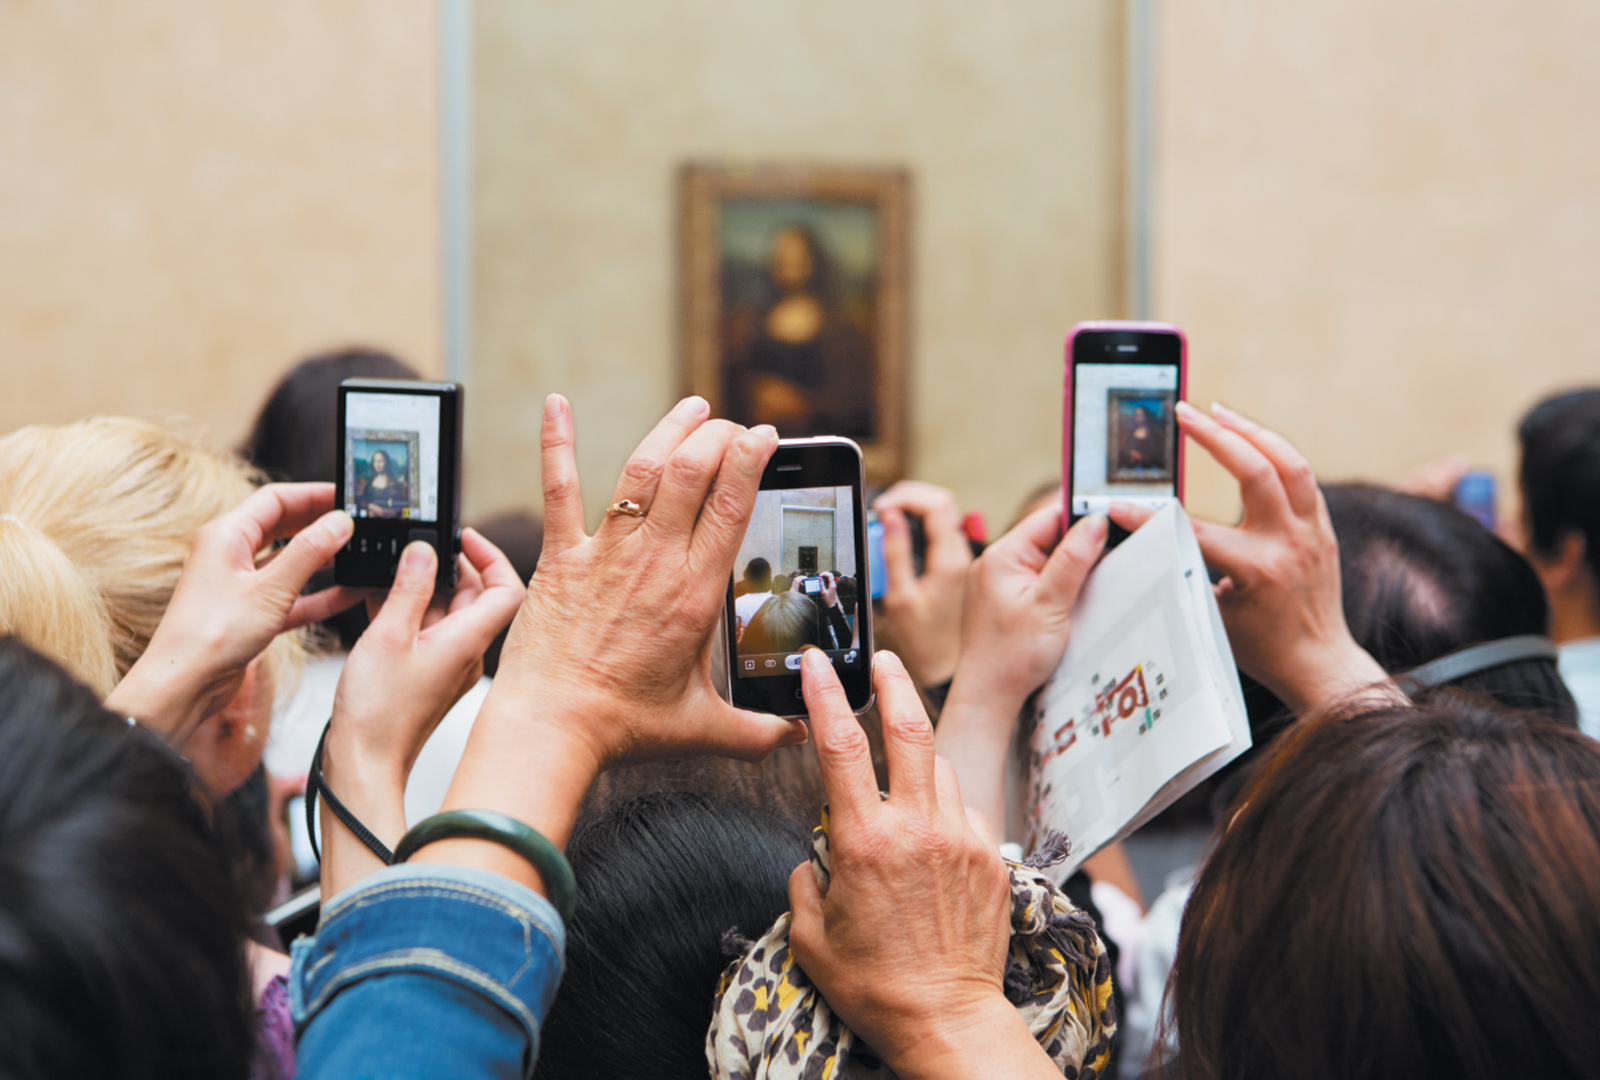 Museumgoers taking photographs of the Mona Lisa at the Louvre, Paris, 2012